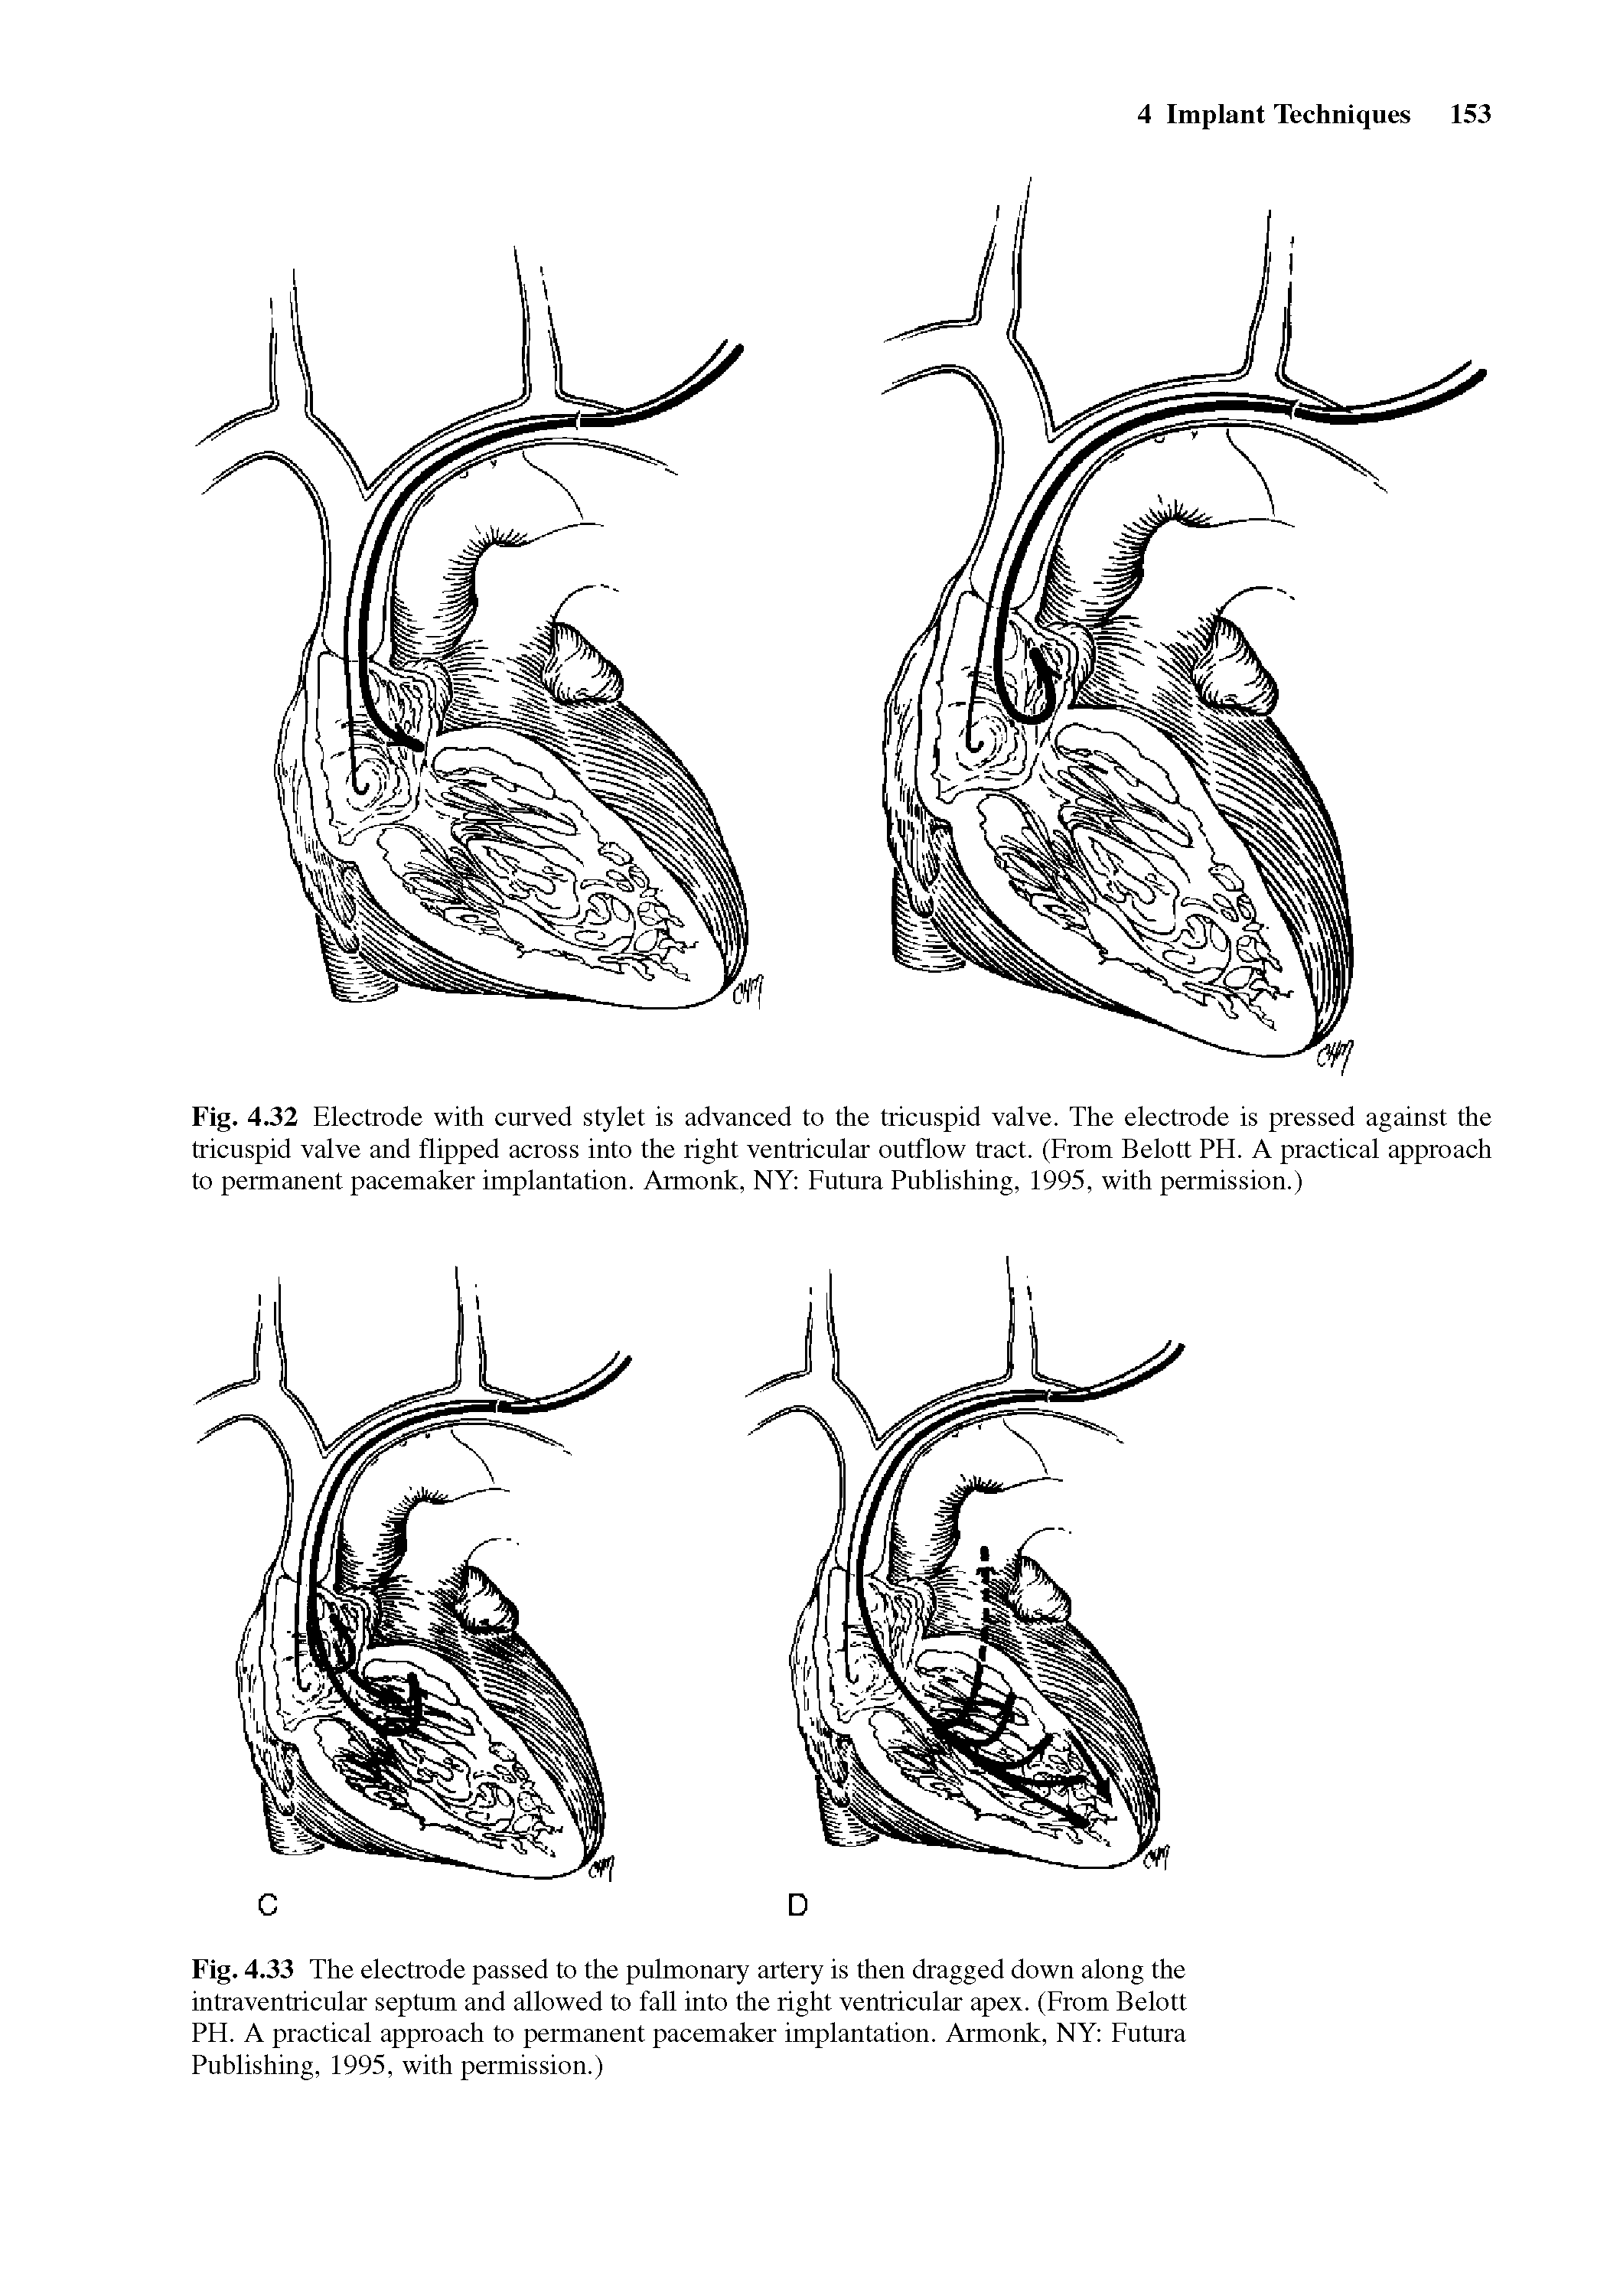 Fig. 4.32 Electrode with curved stylet is advanced to the tricuspid valve. The electrode is pressed against the tricuspid valve and flipped across into the right ventricular outflow tract. (From Belott PH. A practical approach to permanent pacemaker implantation. Armonk, NY Futura Publishing, 1995, with permission.)...